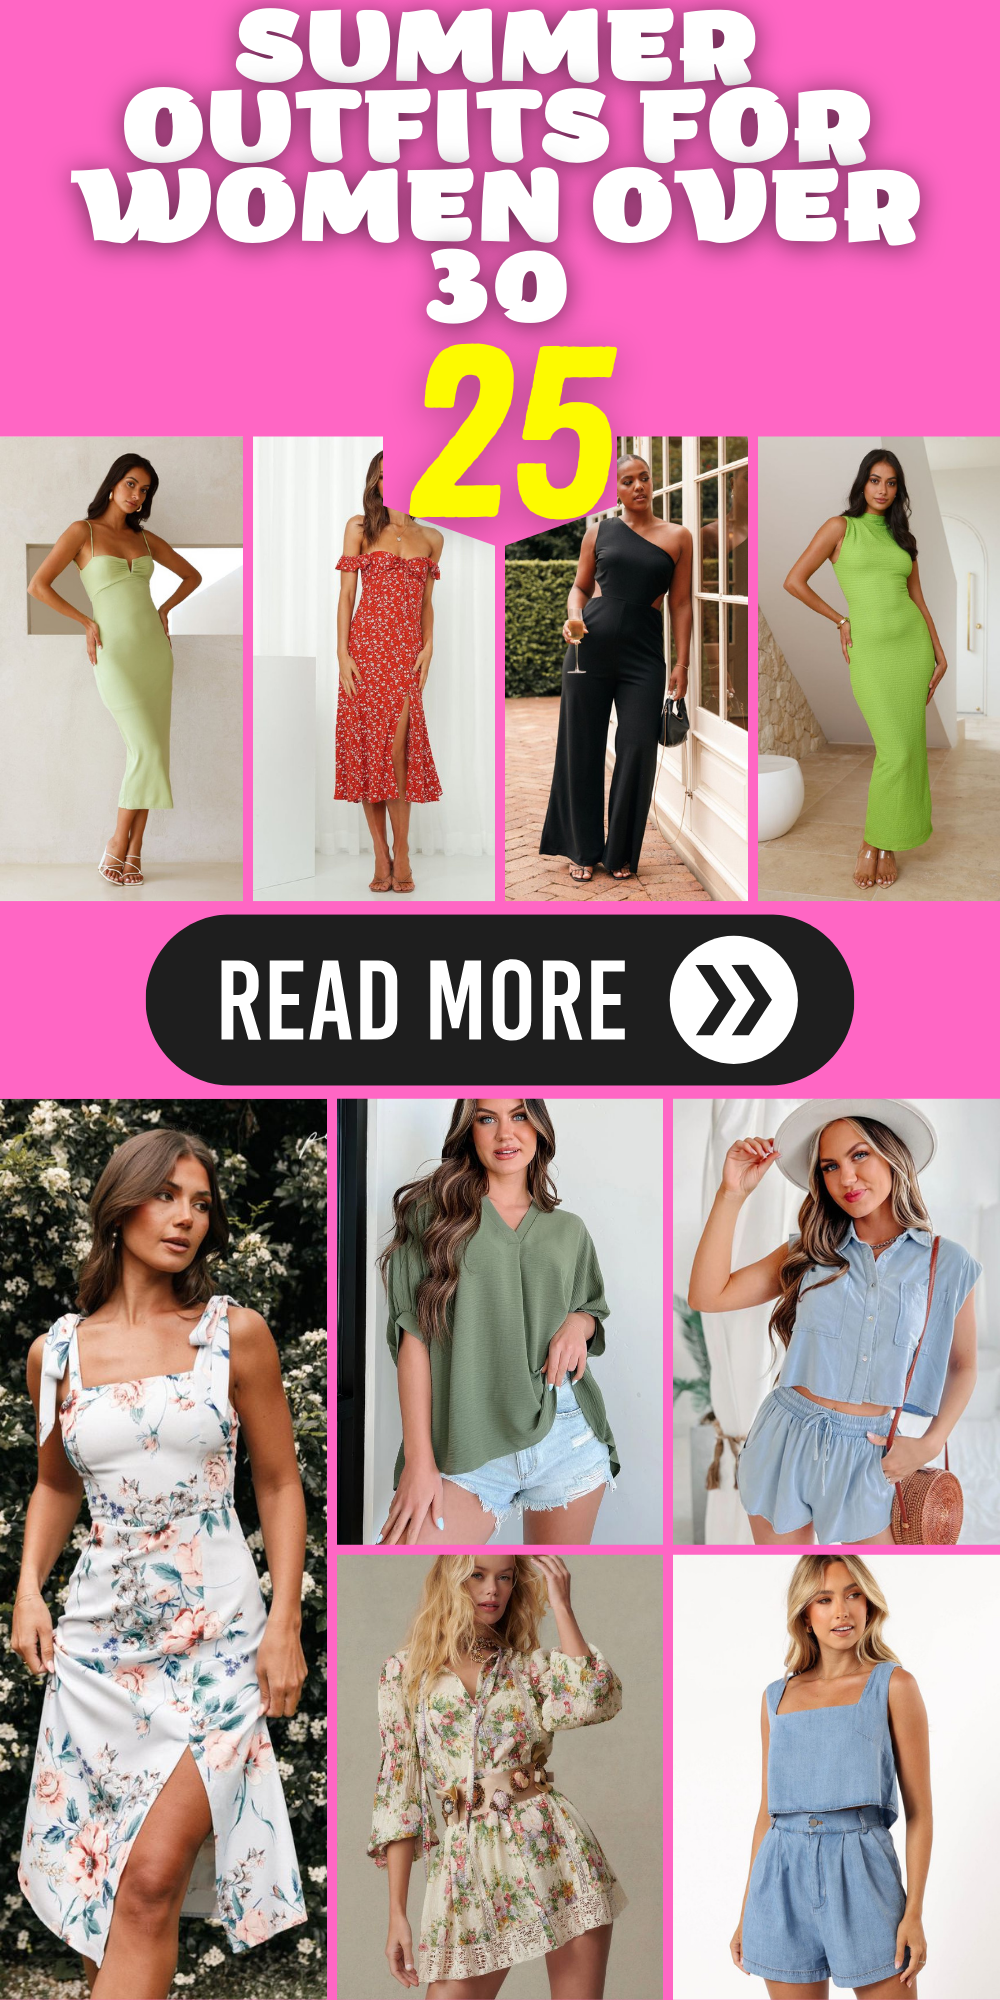 Chic and Stylish: Summer Outfits for Women Over 30